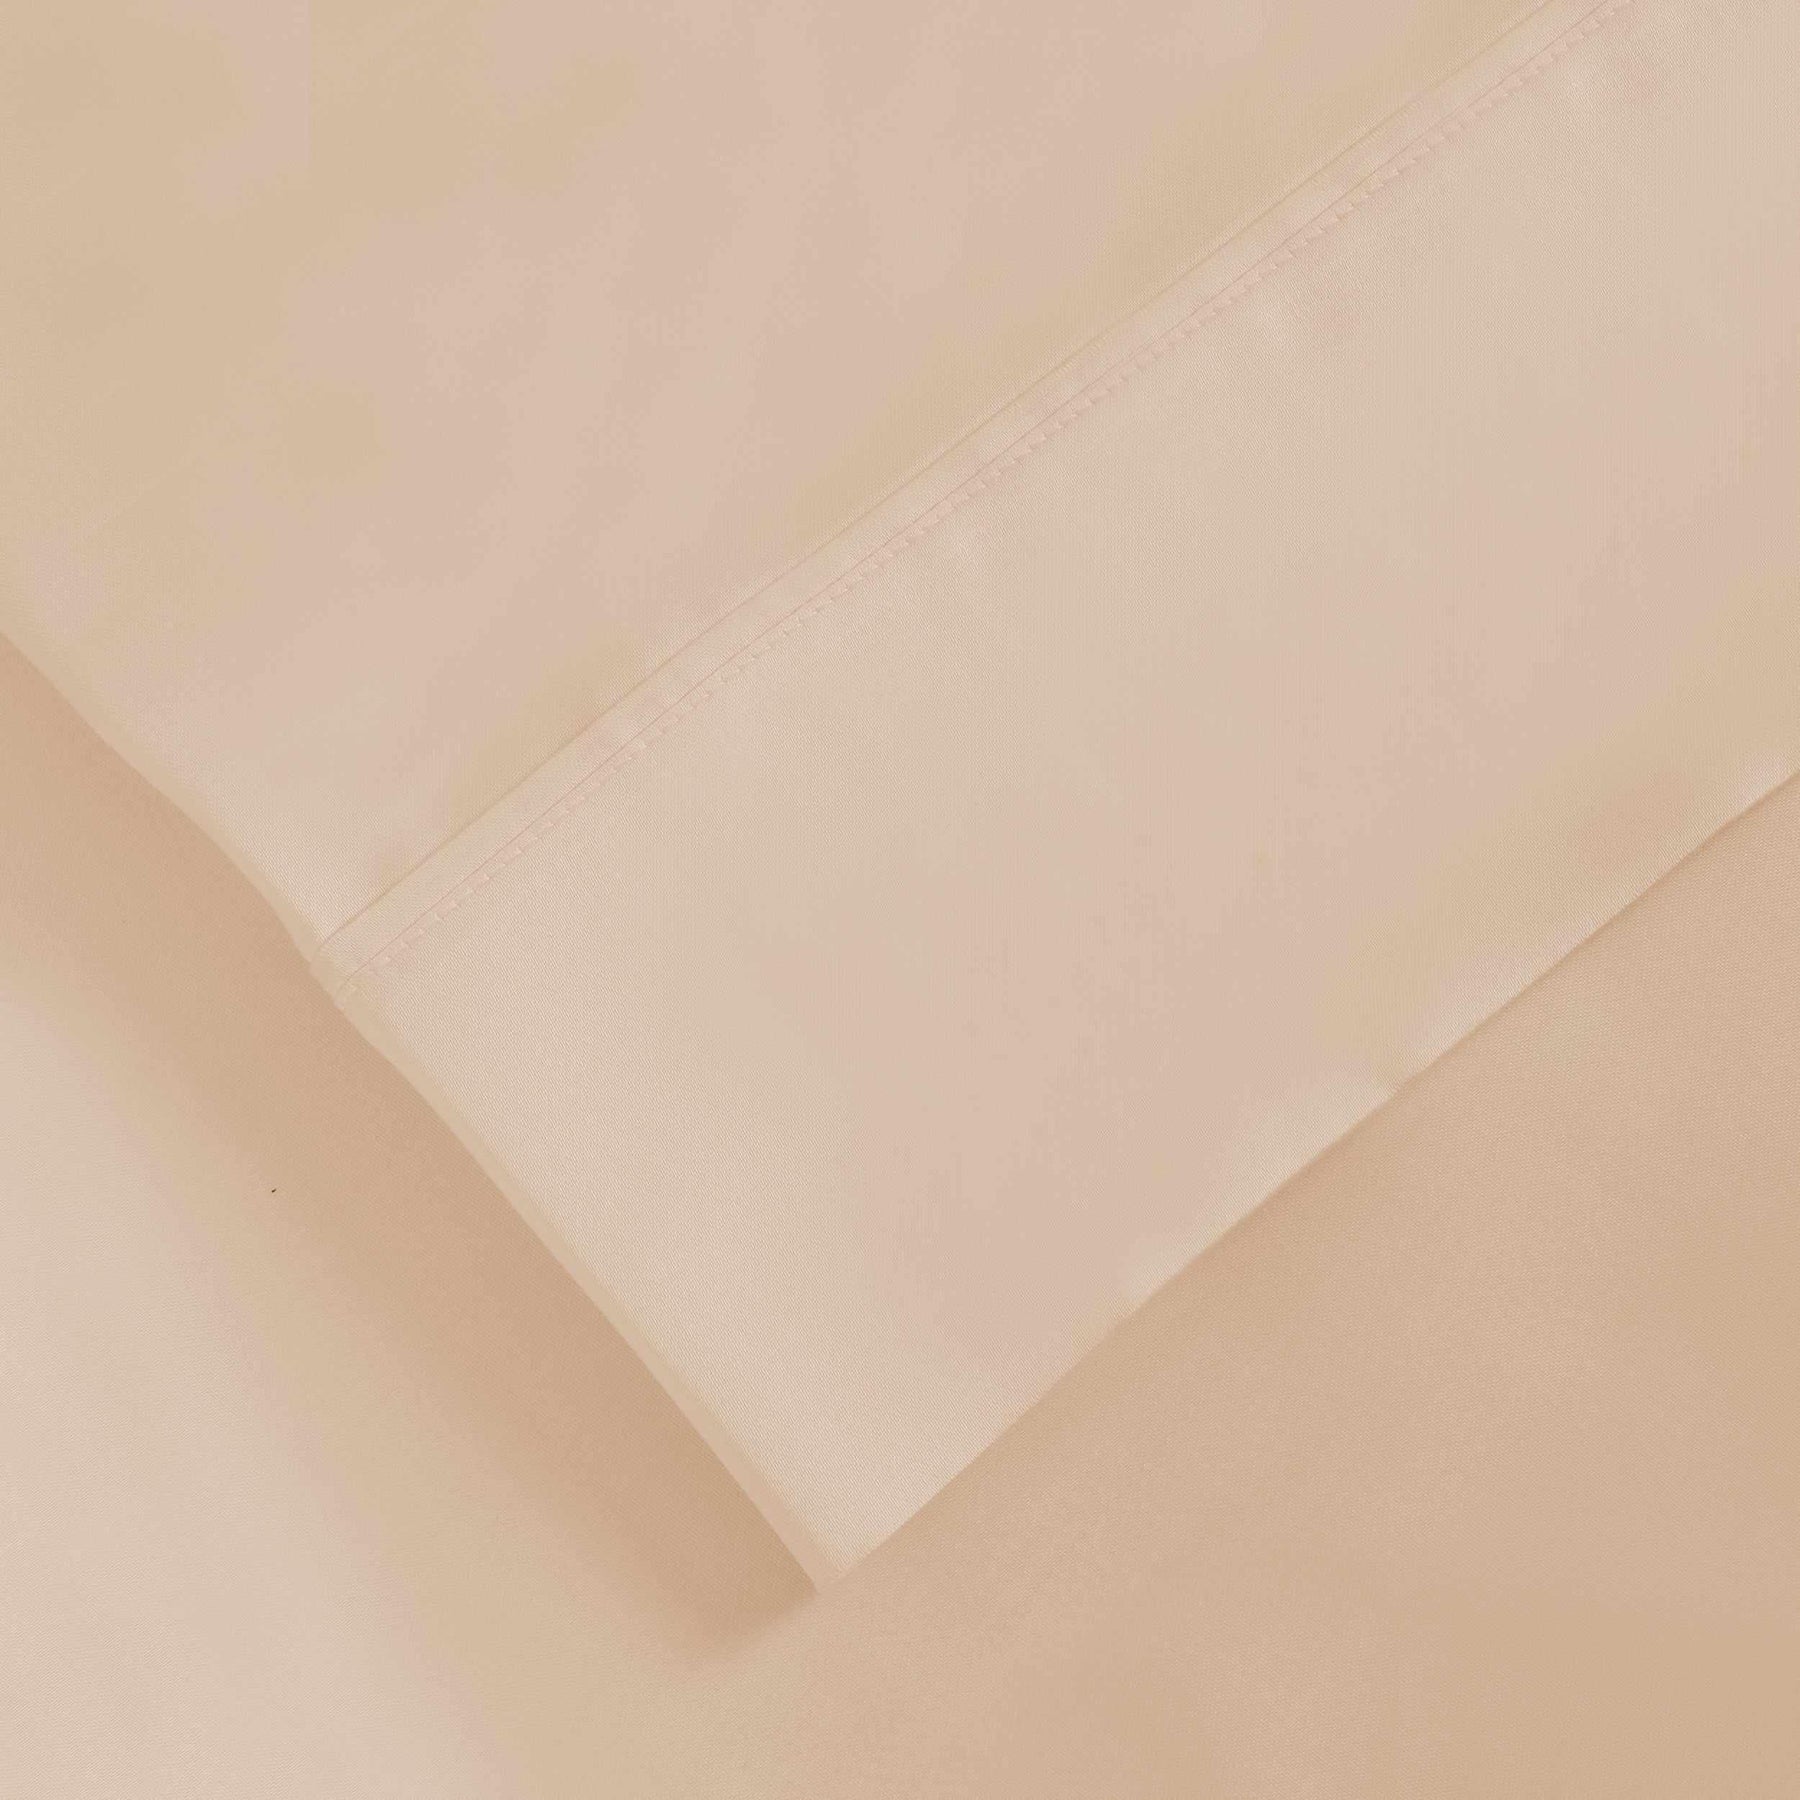  Superior 1000 Thread Count Lyocell Blend Wrinkle Resistant Solid Sheet Set - Ivory